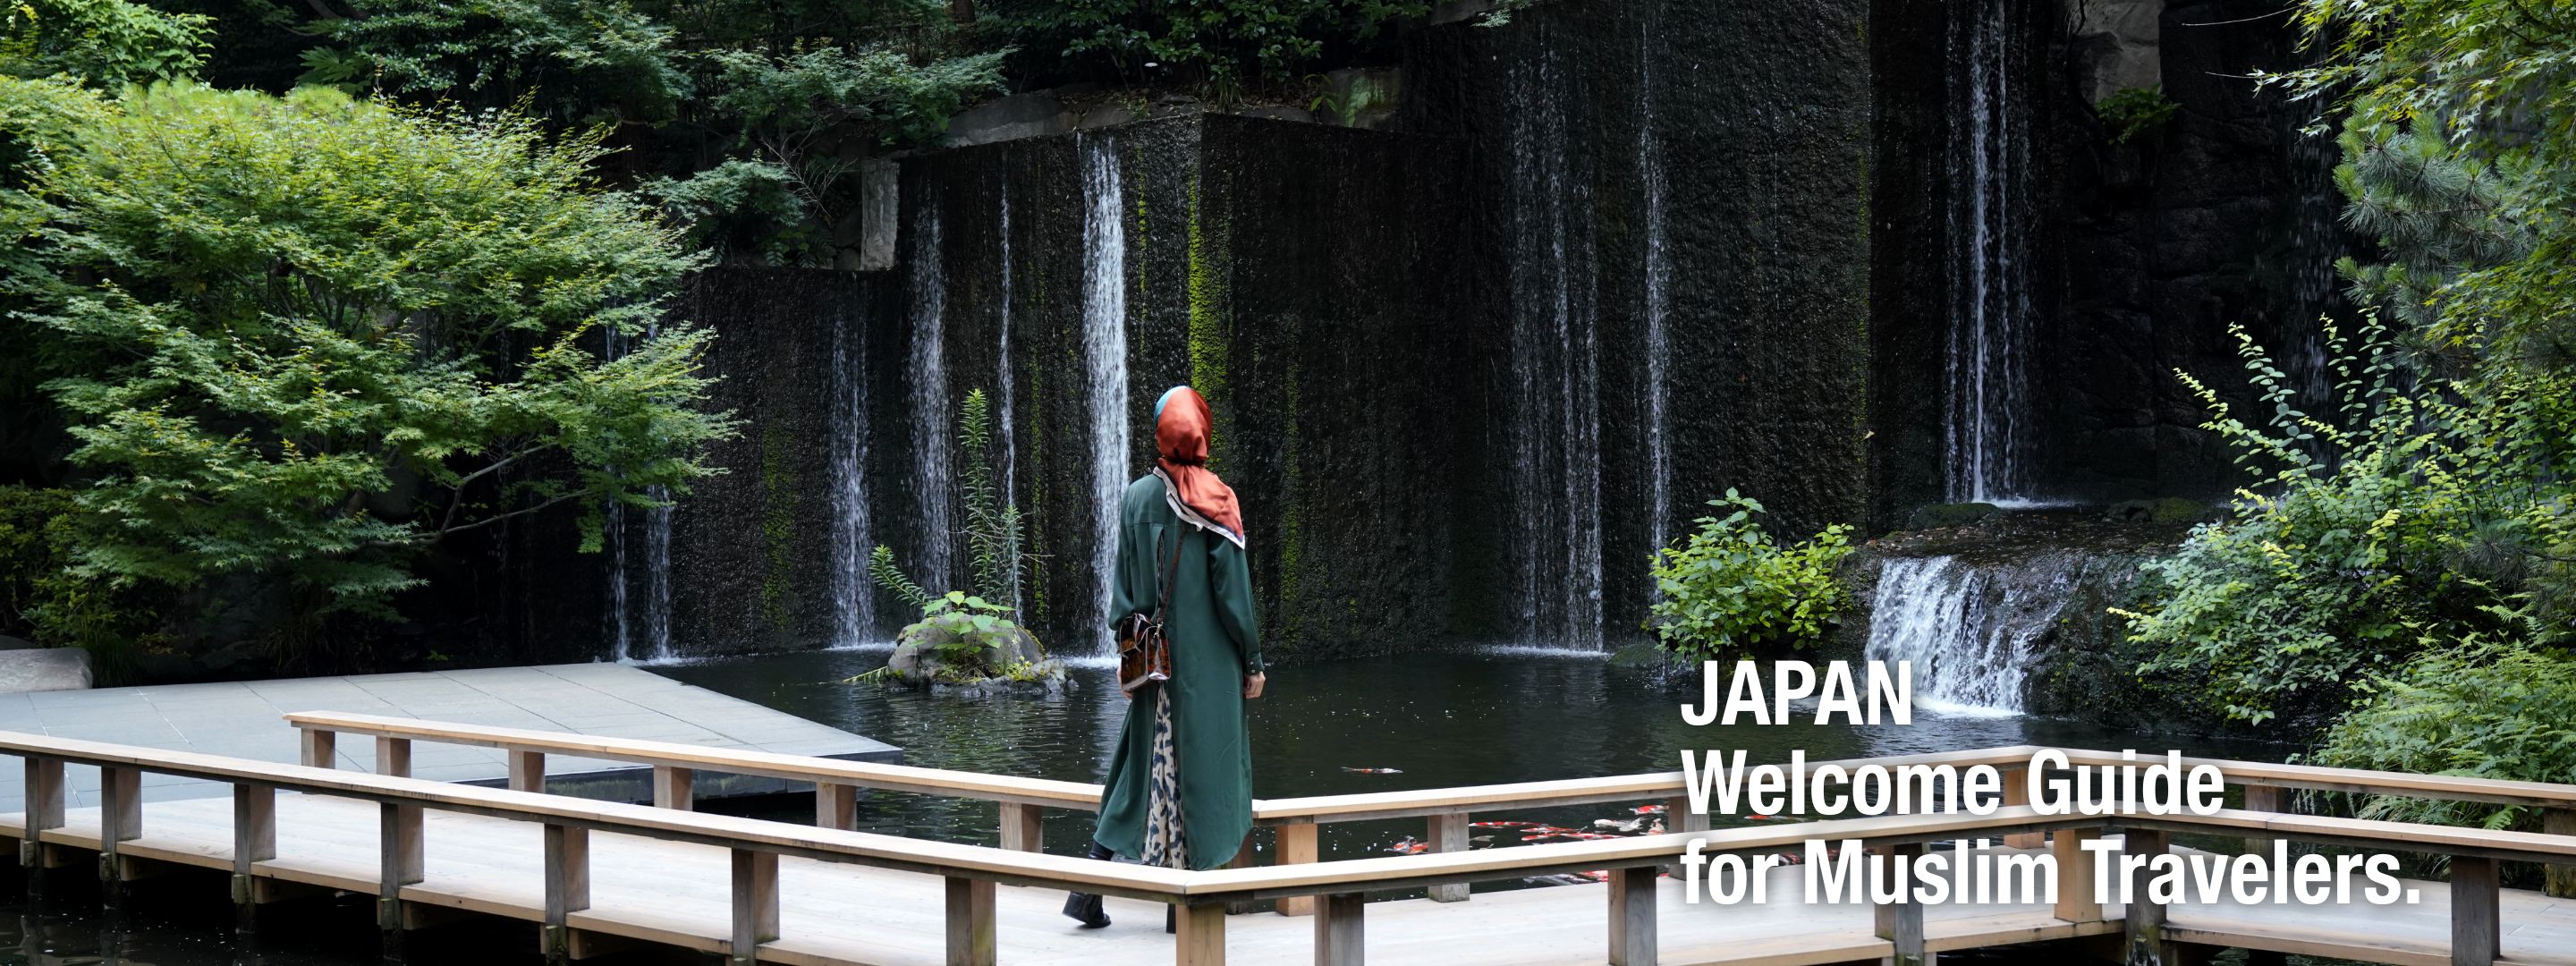 JAPAN Welcome Guide for Muslim Travelers. Muslim-friendly accommodations and facilities in Tokyo. Hotel Gajoen Tokyo